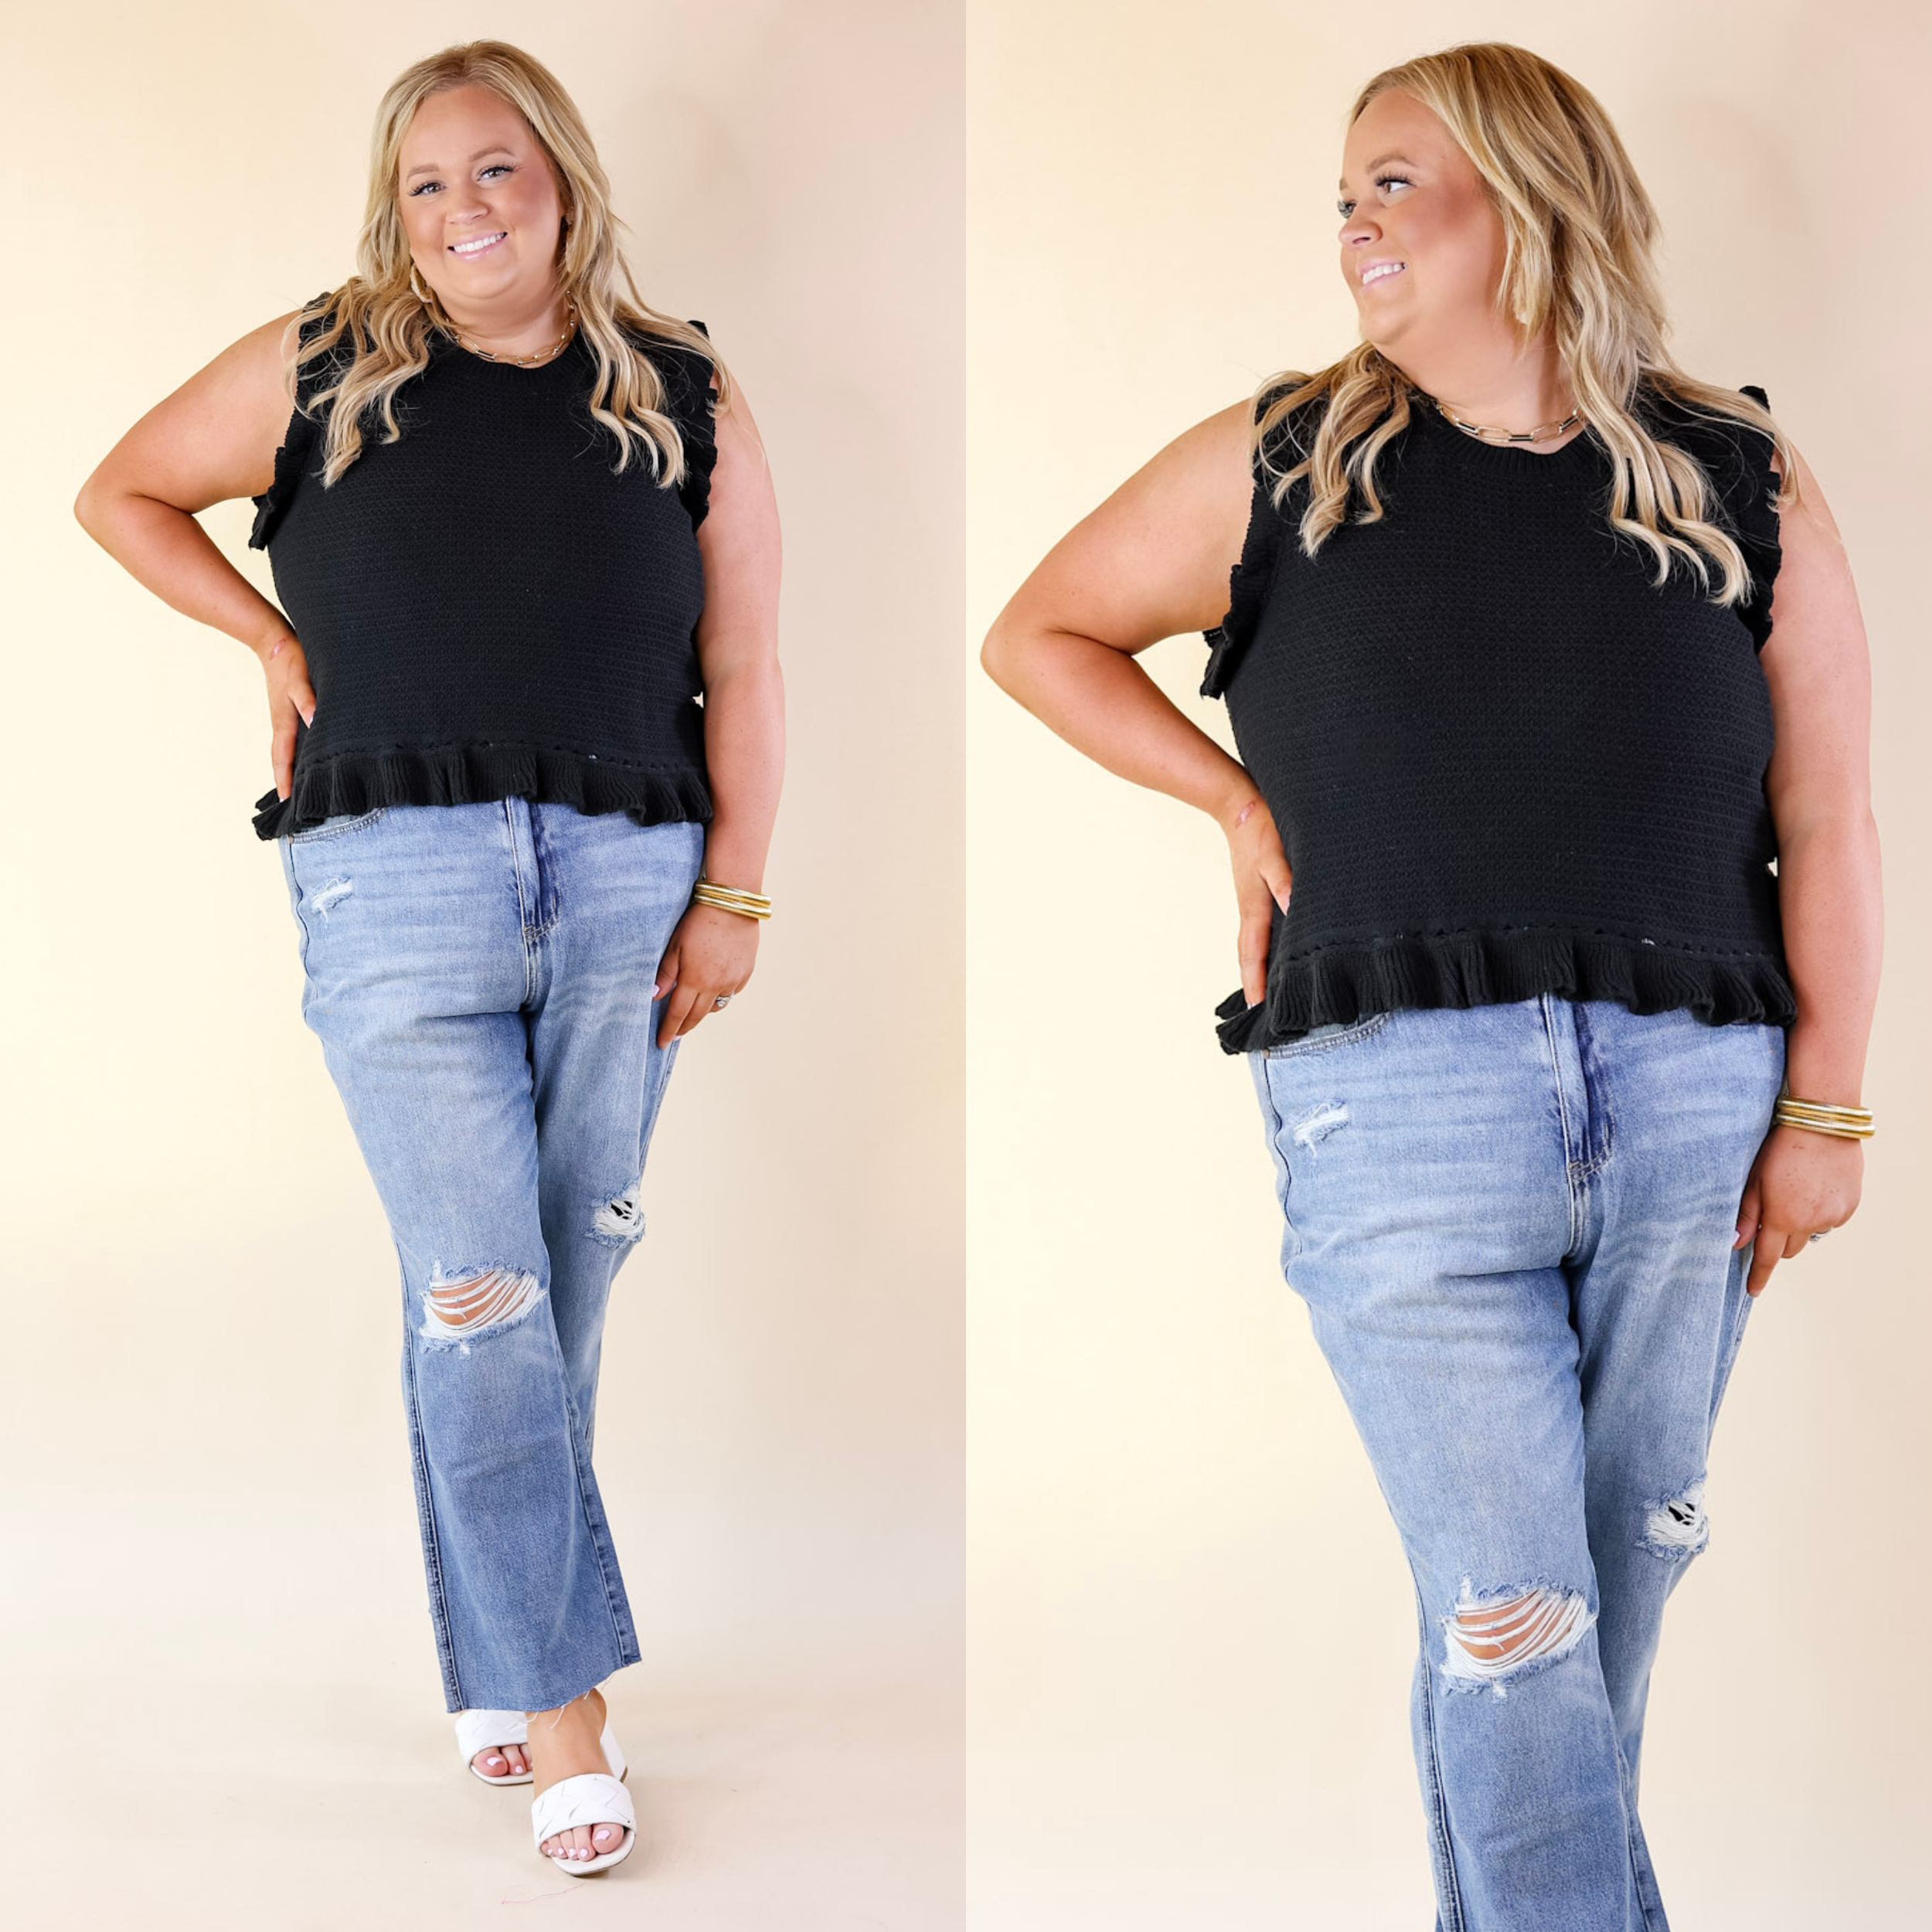 Breezy Baby Cropped Sweater with Ruffle Cap Sleeves in Black - Giddy Up Glamour Boutique